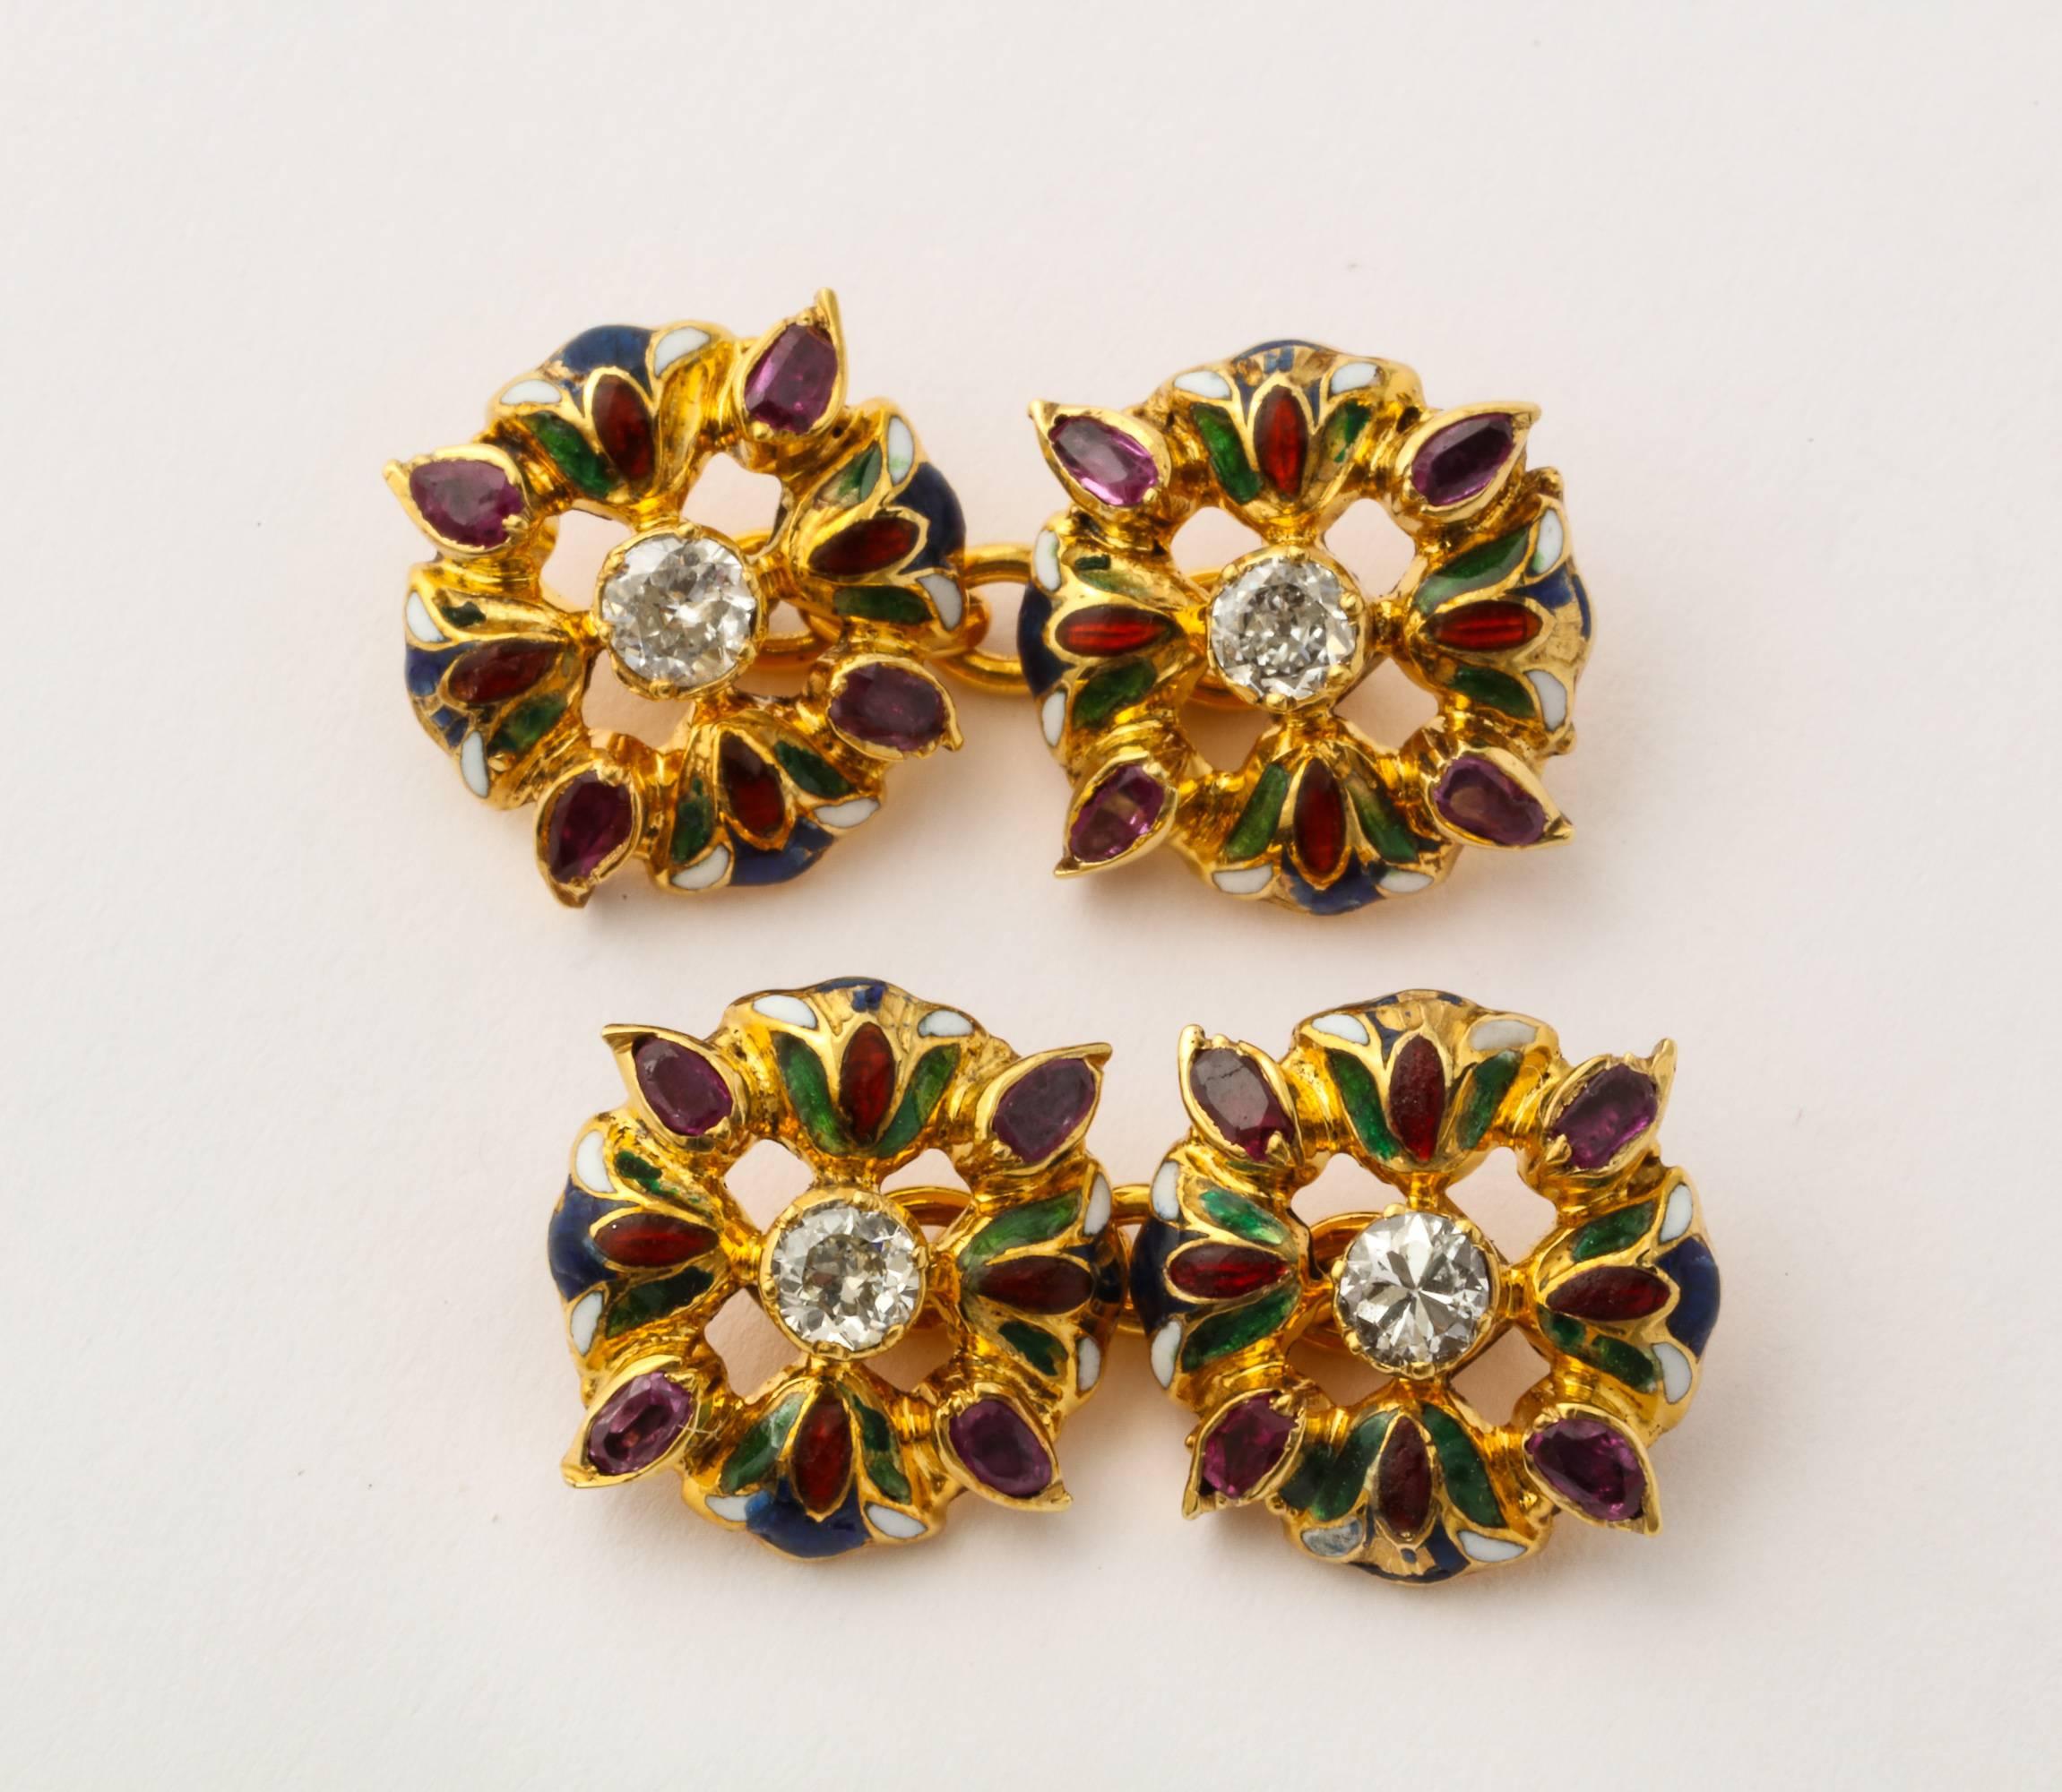 A beautiful Art Nouveau Egyptian style formal set of double side cufflinks and three studs in 18K gold, each element formed as four lotus flowers with green and red enameled petals, each centered with a diamond and a ruby set between each flower.